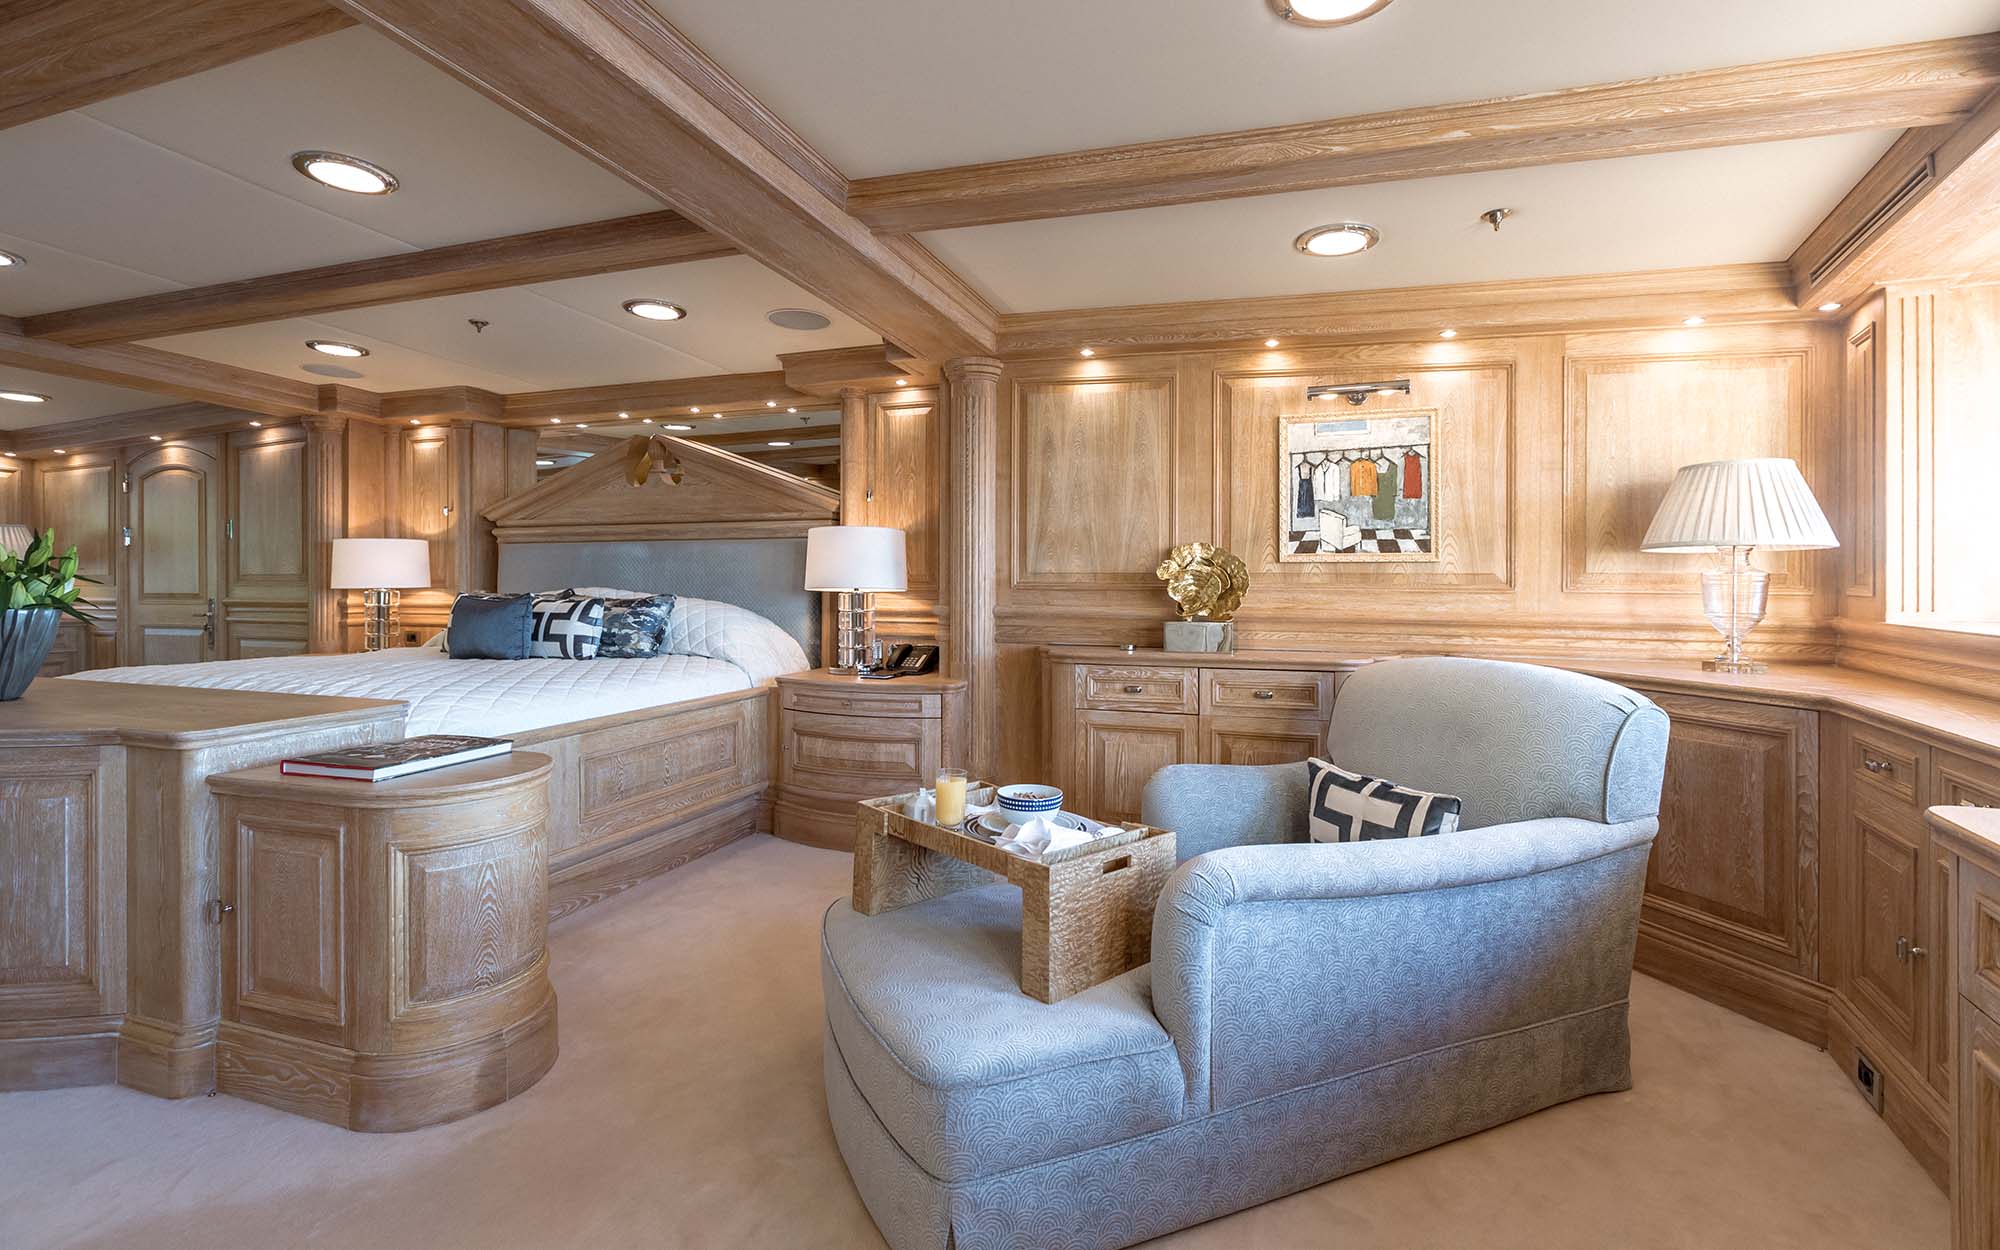 NERO Yacht master suite with coffered ceilings